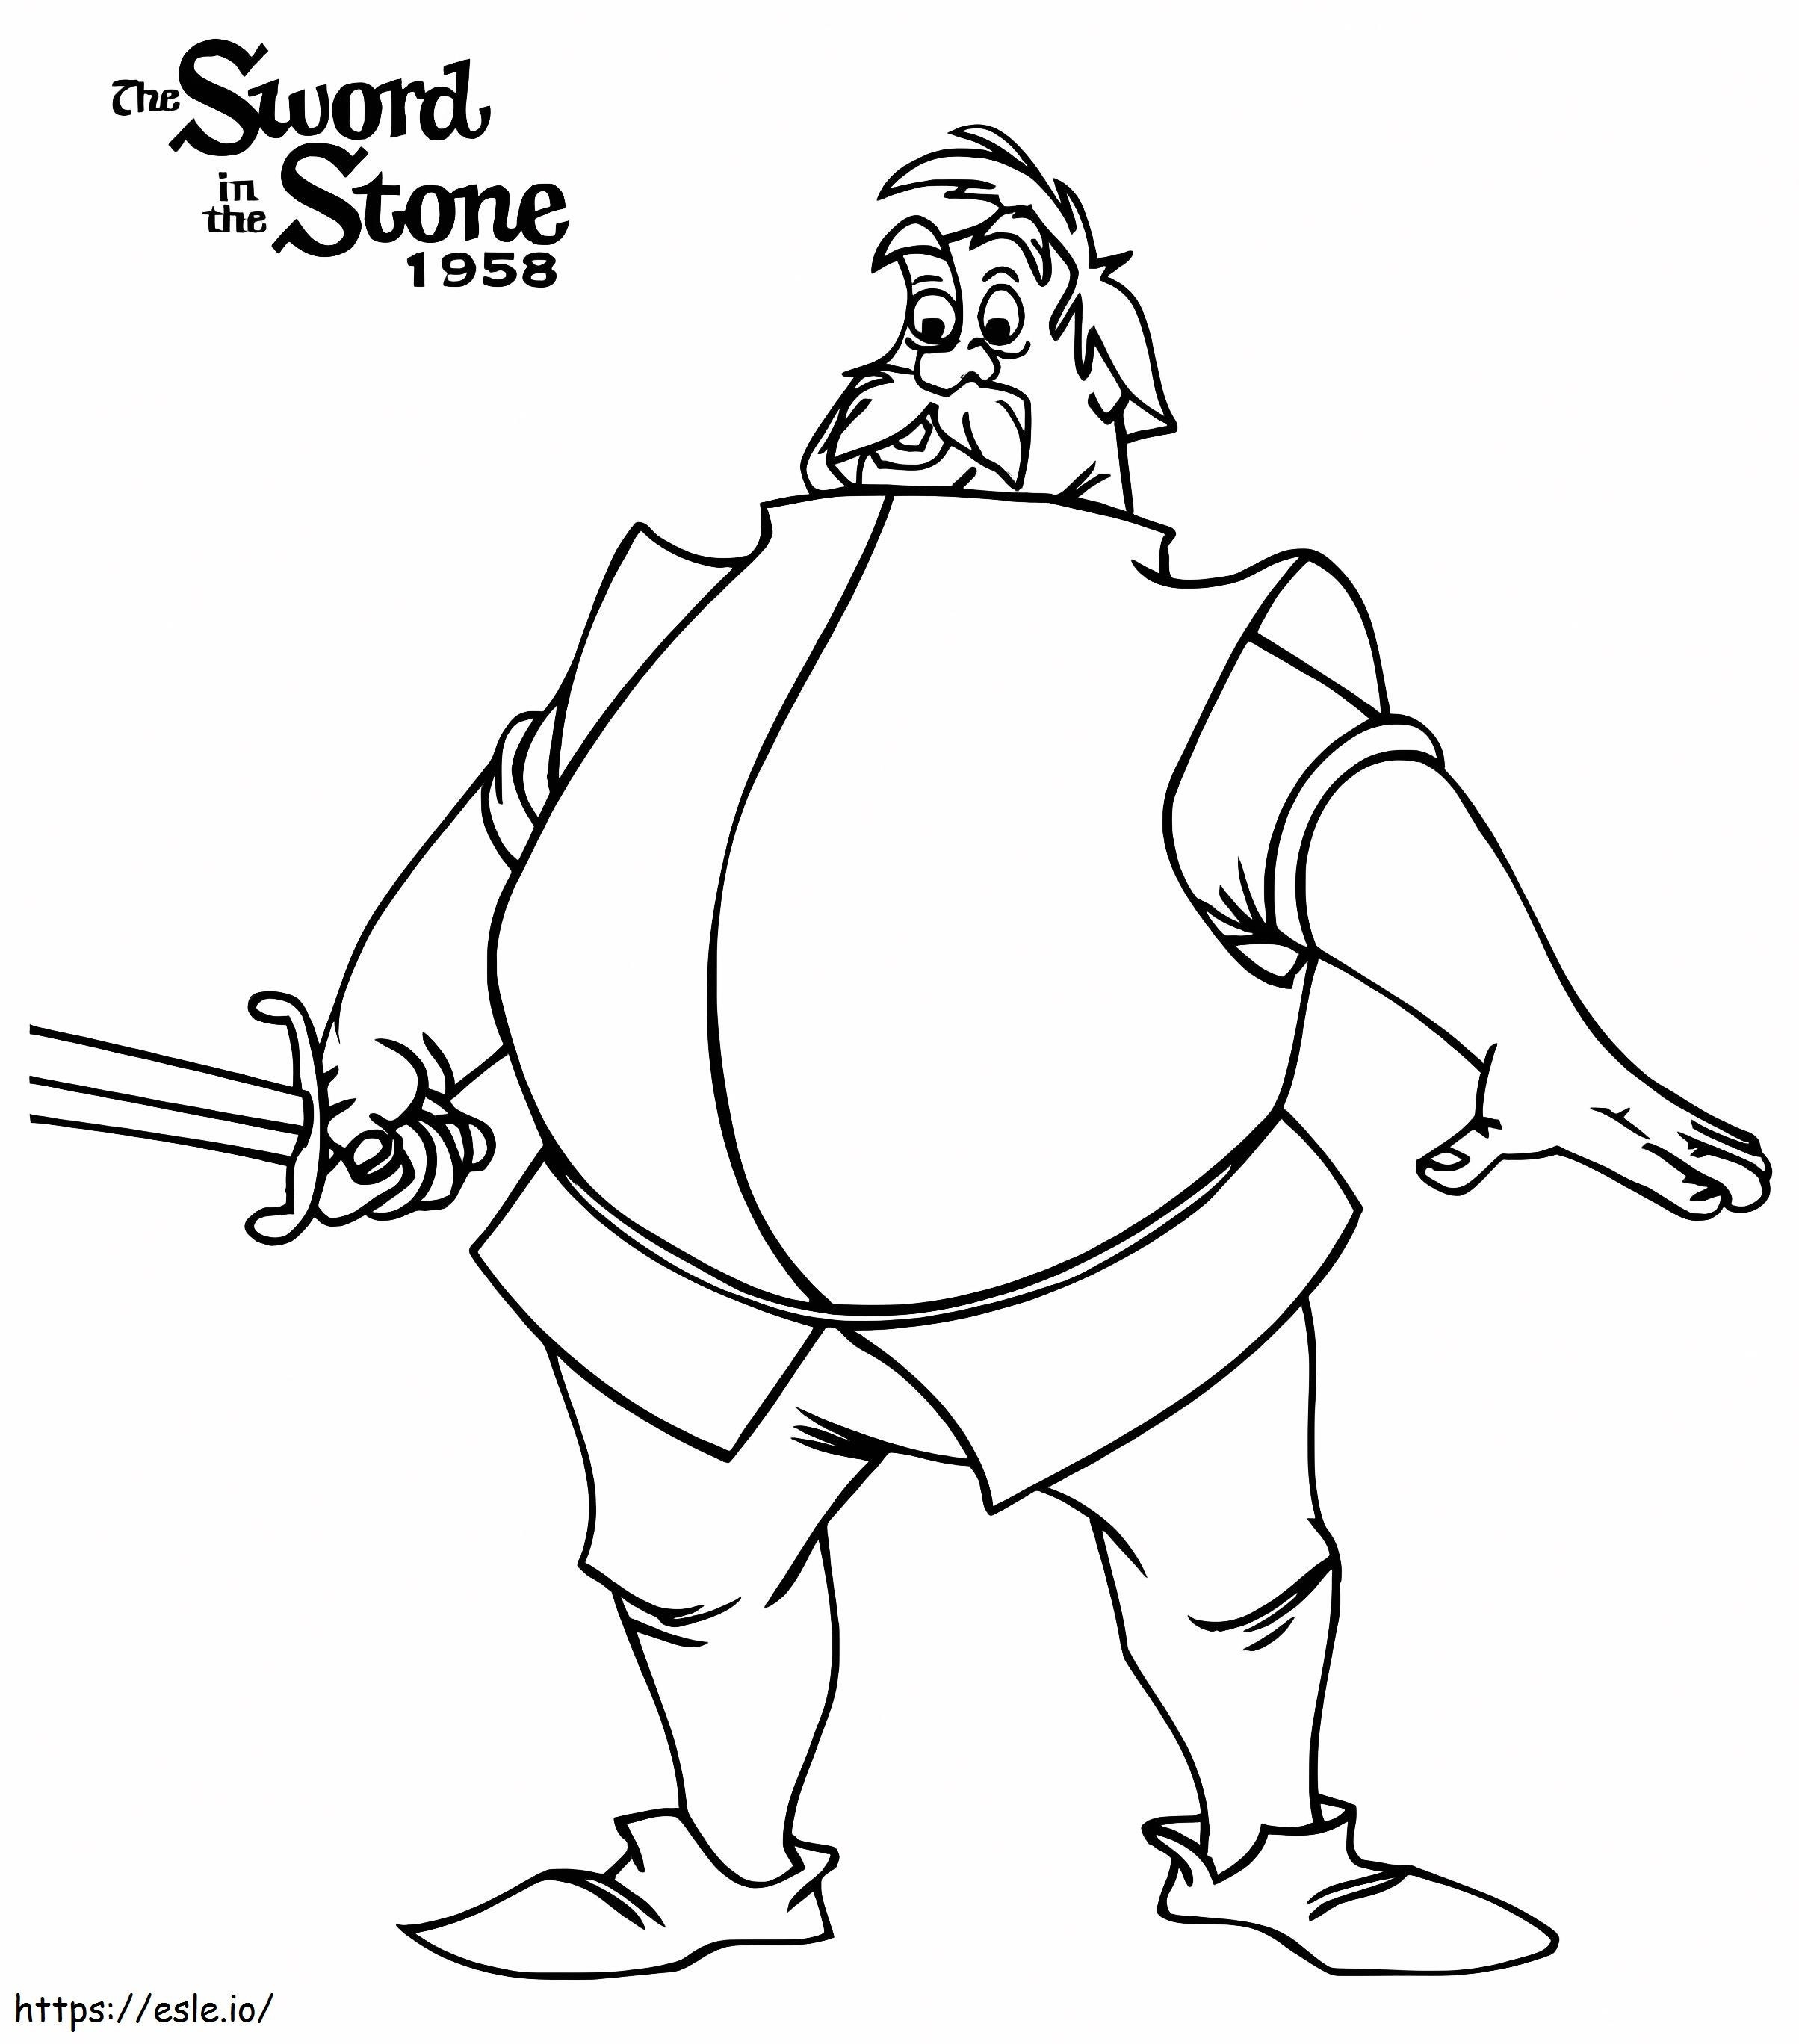 Sir Ector From The Sword In The Stone coloring page